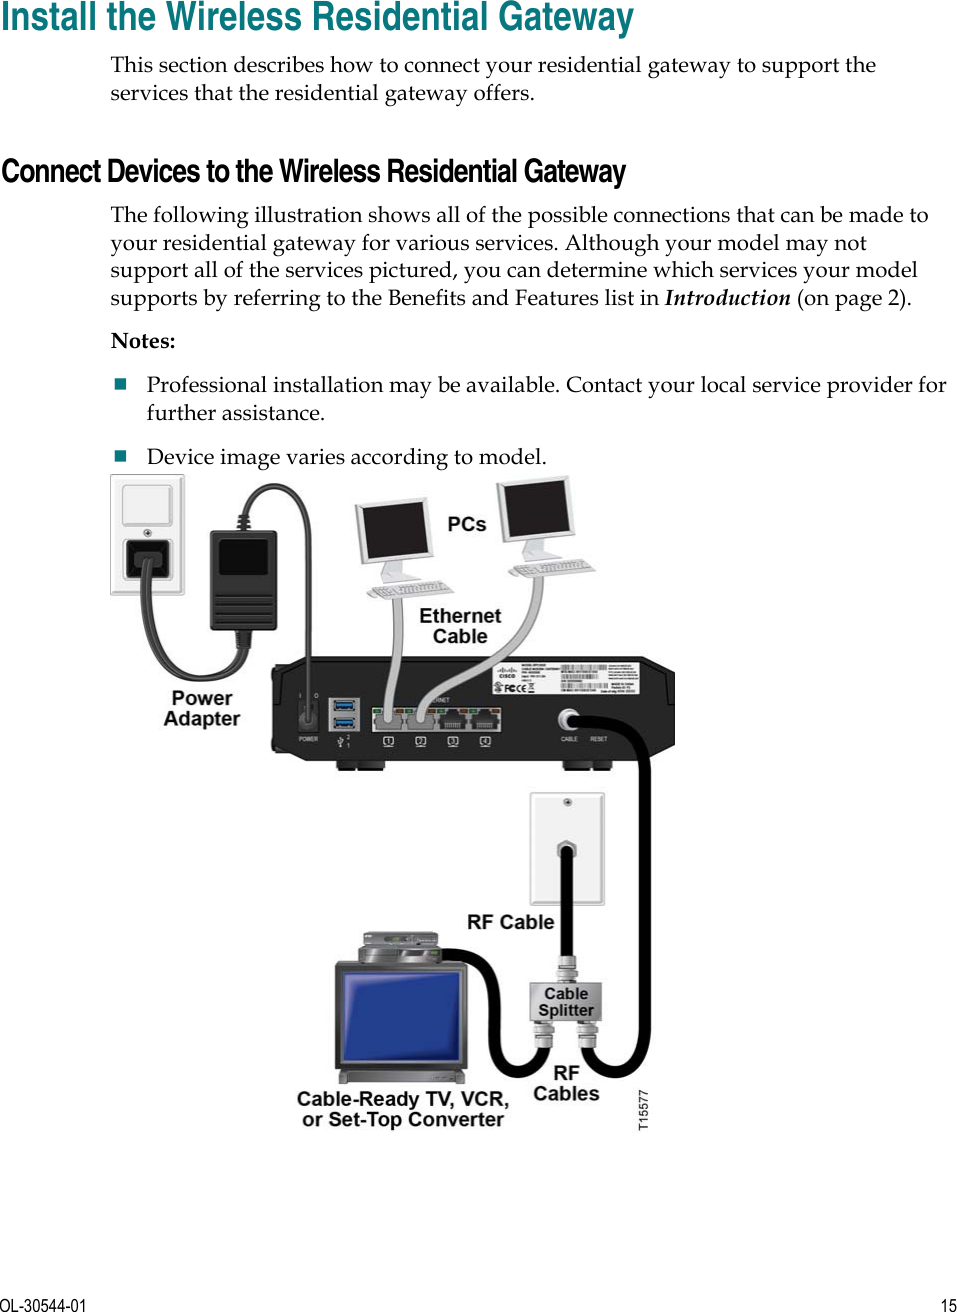      OL-30544-01  15  Install the Wireless Residential Gateway This section describes how to connect your residential gateway to support the services that the residential gateway offers.     Connect Devices to the Wireless Residential Gateway The following illustration shows all of the possible connections that can be made to your residential gateway for various services. Although your model may not support all of the services pictured, you can determine which services your model supports by referring to the Benefits and Features list in Introduction (on page 2). Notes: Professional installation may be available. Contact your local service provider for further assistance. Device image varies according to model.  